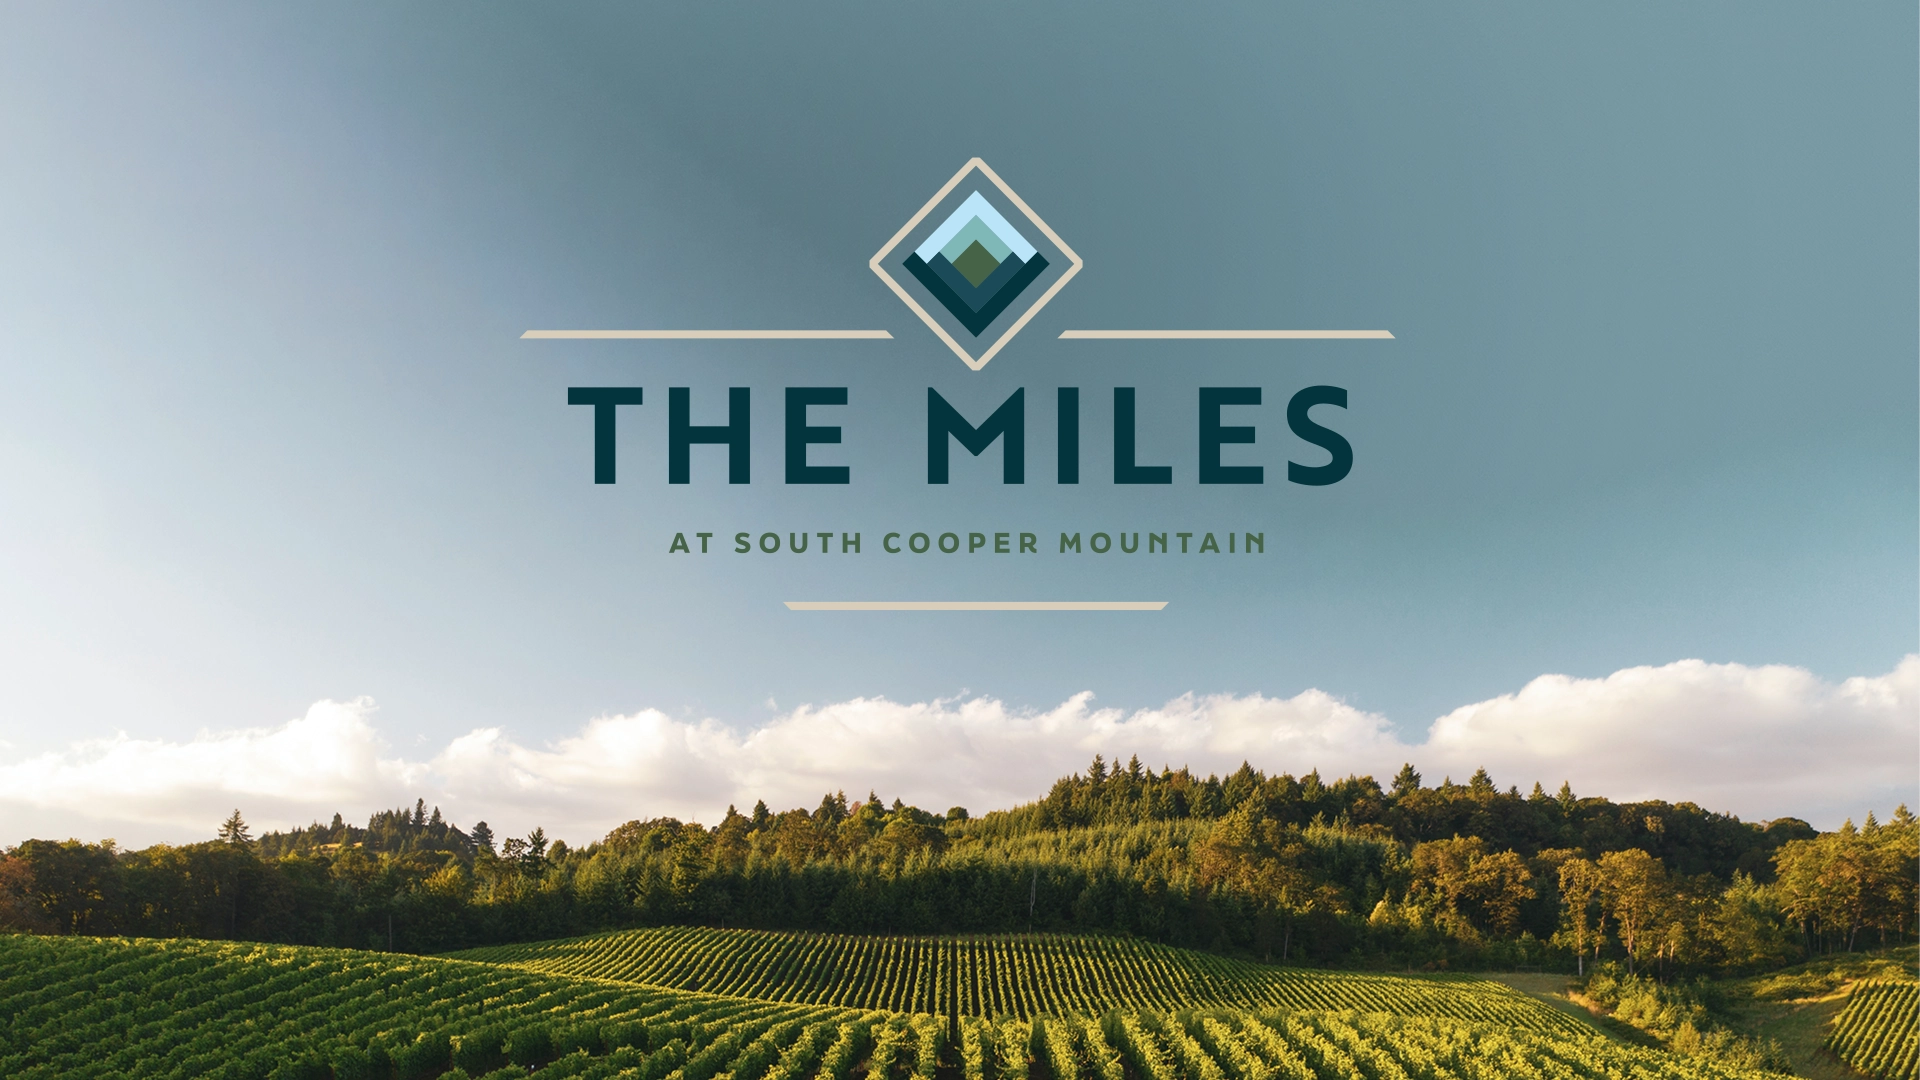 The Miles at South Cooper Mountain brand Logo over an image of fields created by Incubate Design